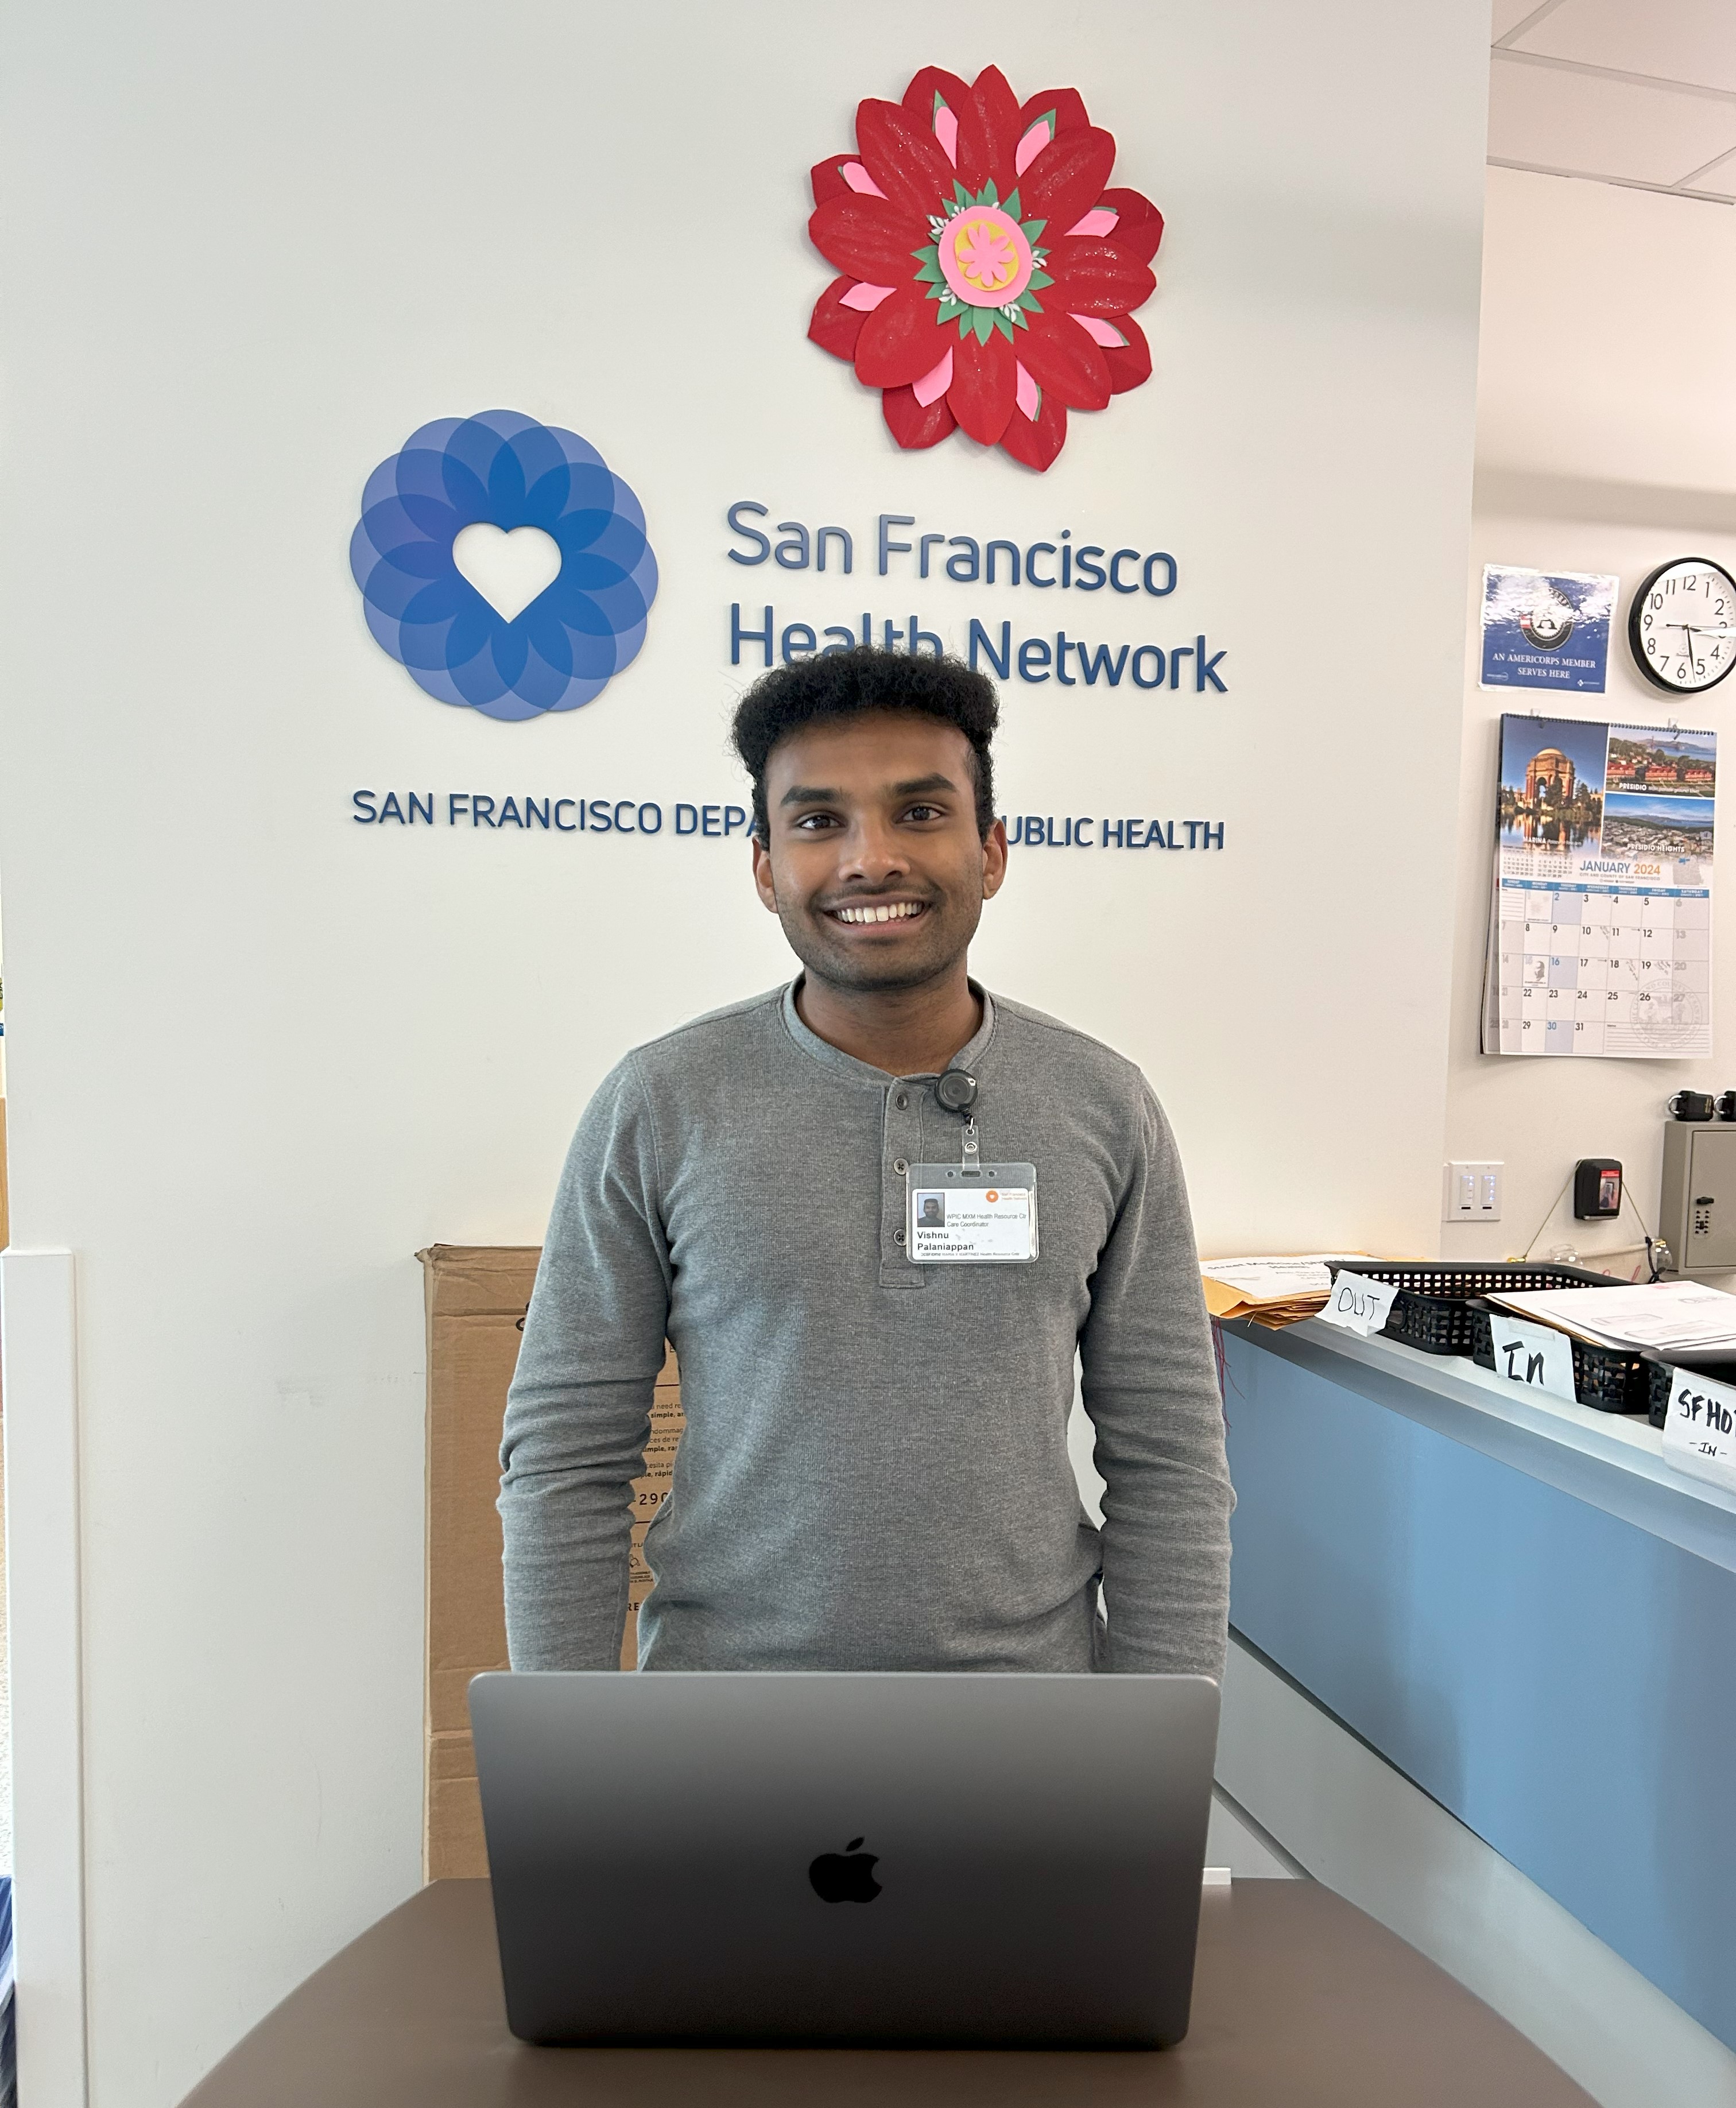 Vishnu is standing in the middle of the frame, facing the camera. He is standing behind a podium and has his laptop set on the podium in front of him. Behind him is the San Francisco Health Network logo. 